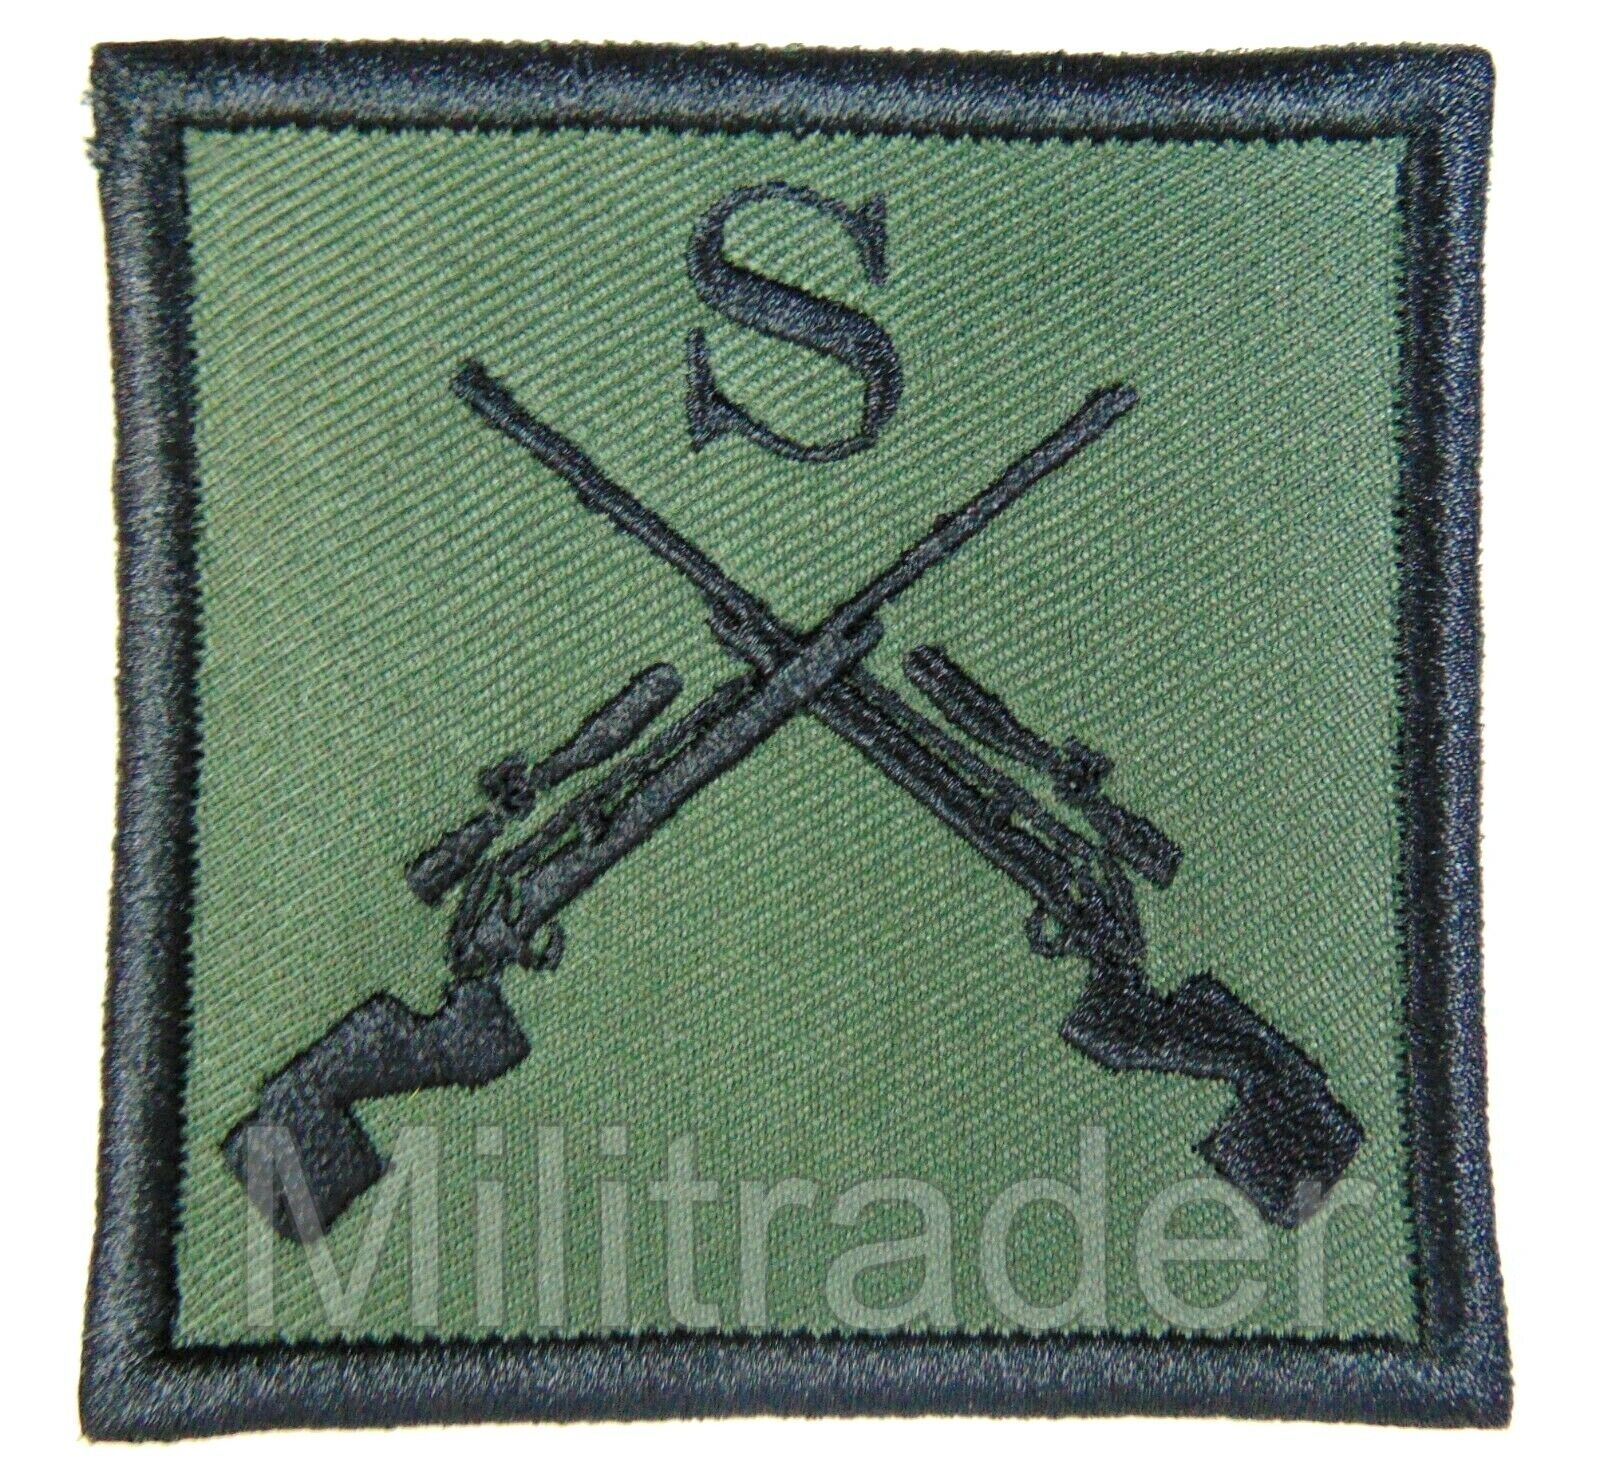 Britain British Army Sniper Qualification Patch (Subdued)